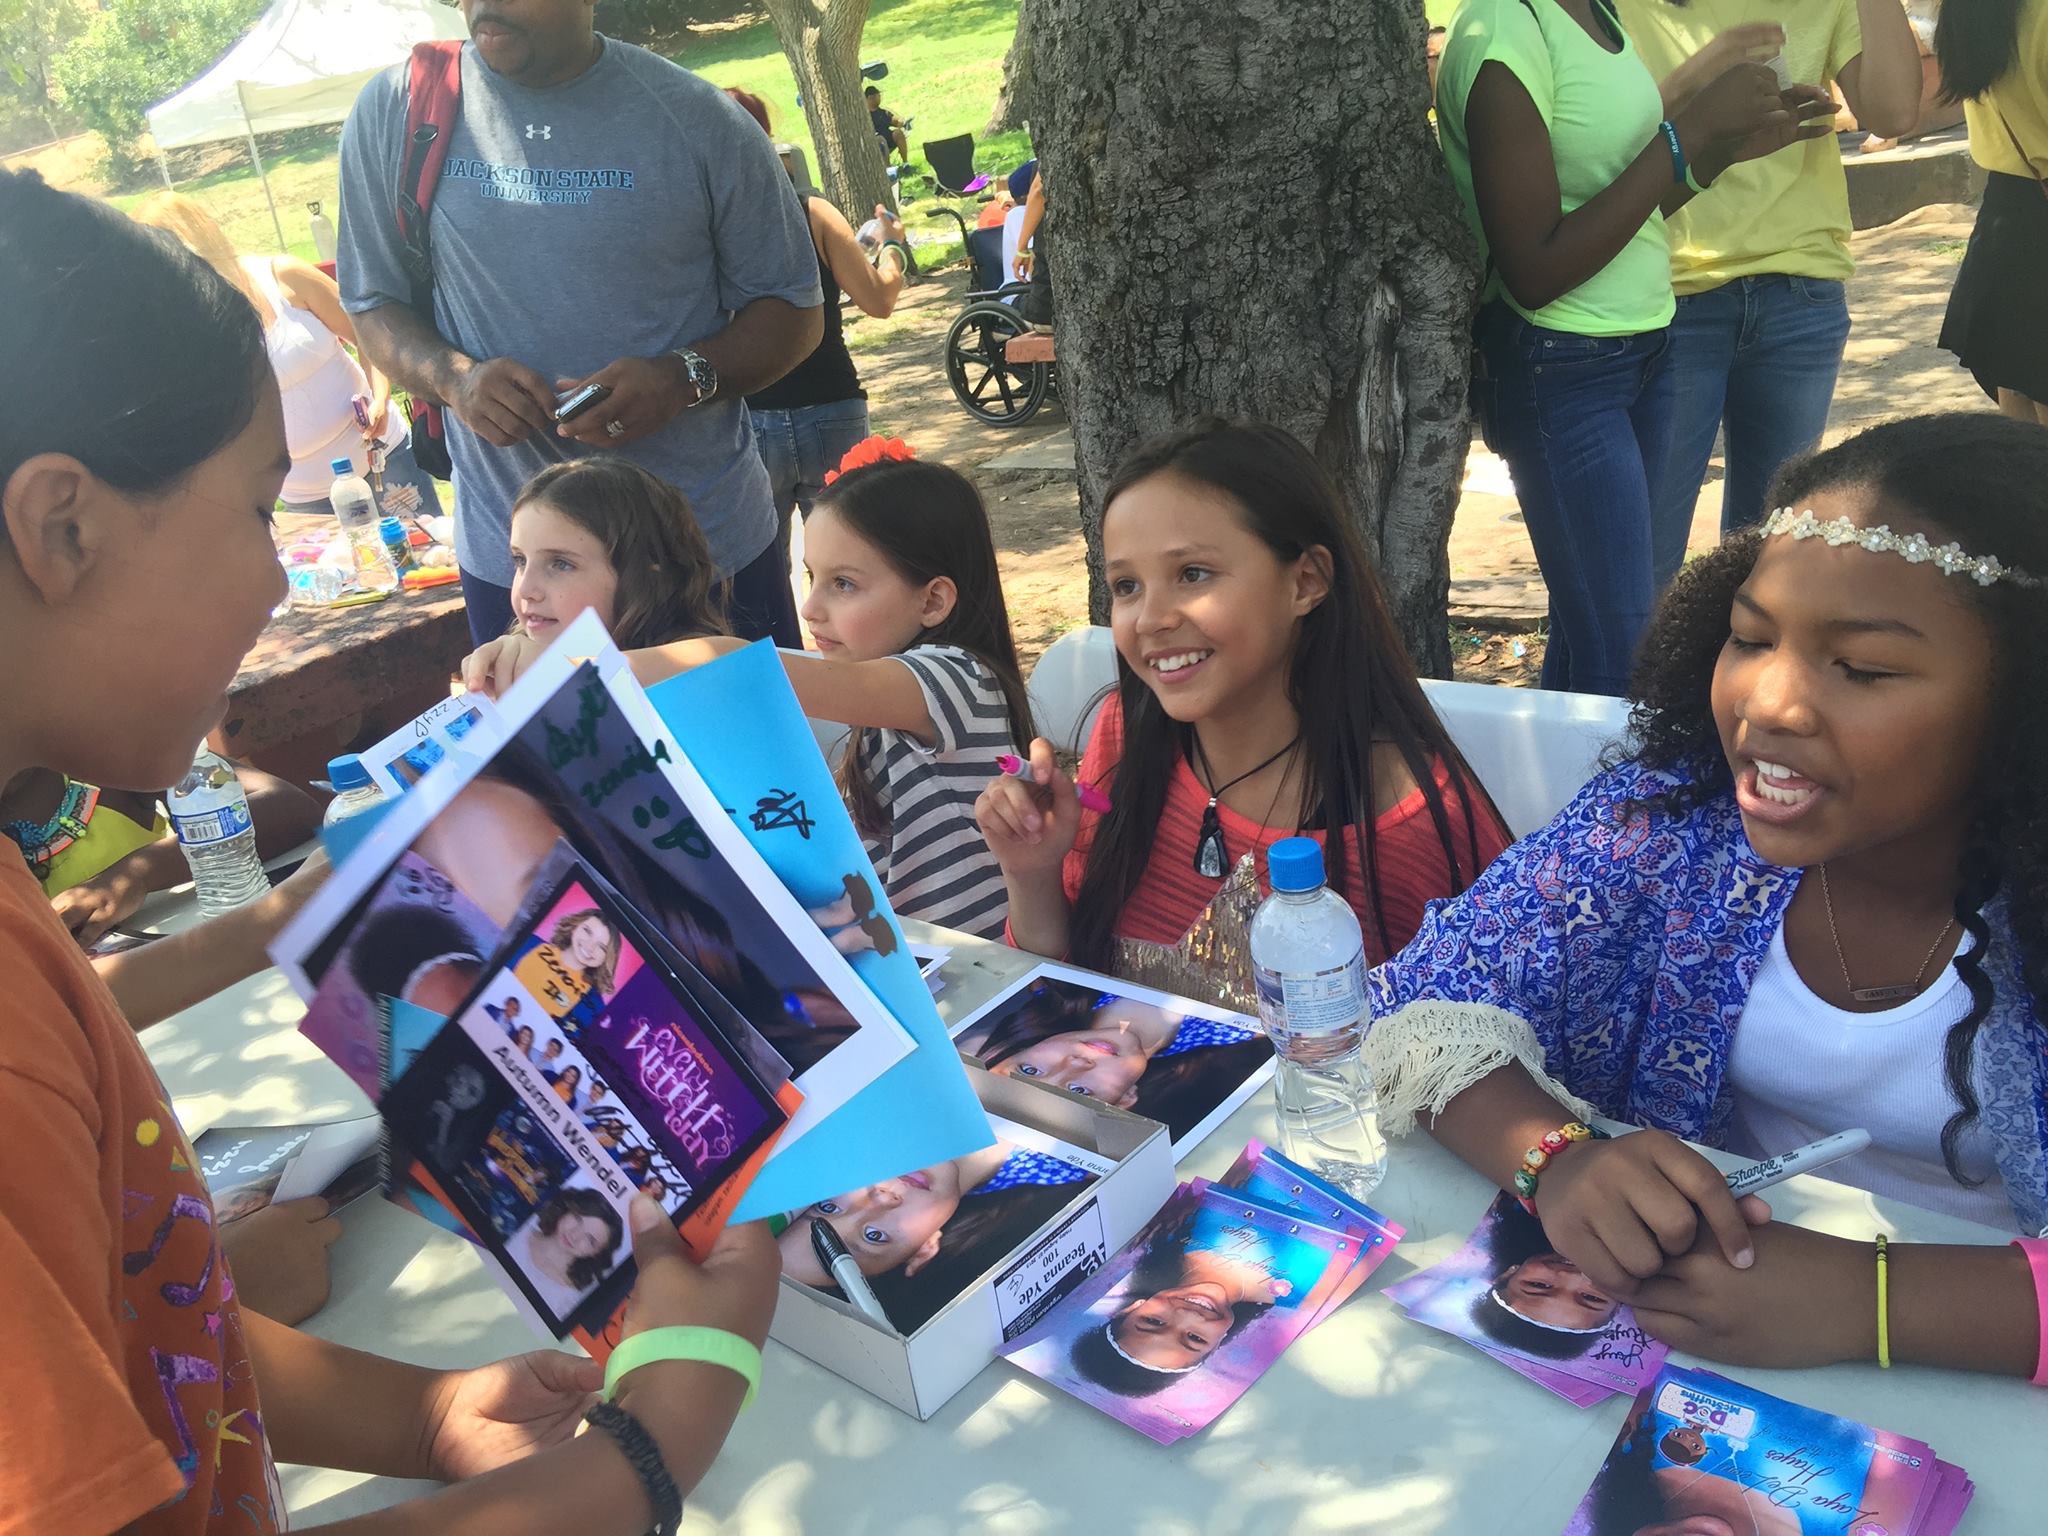 Shea having a blast signing autographs at the 2015 Walk for Kids Growth red carpet and celeb meet and great. Shea sitting next to Bryanna Yde, and Laya Hayes and Joelle Better.